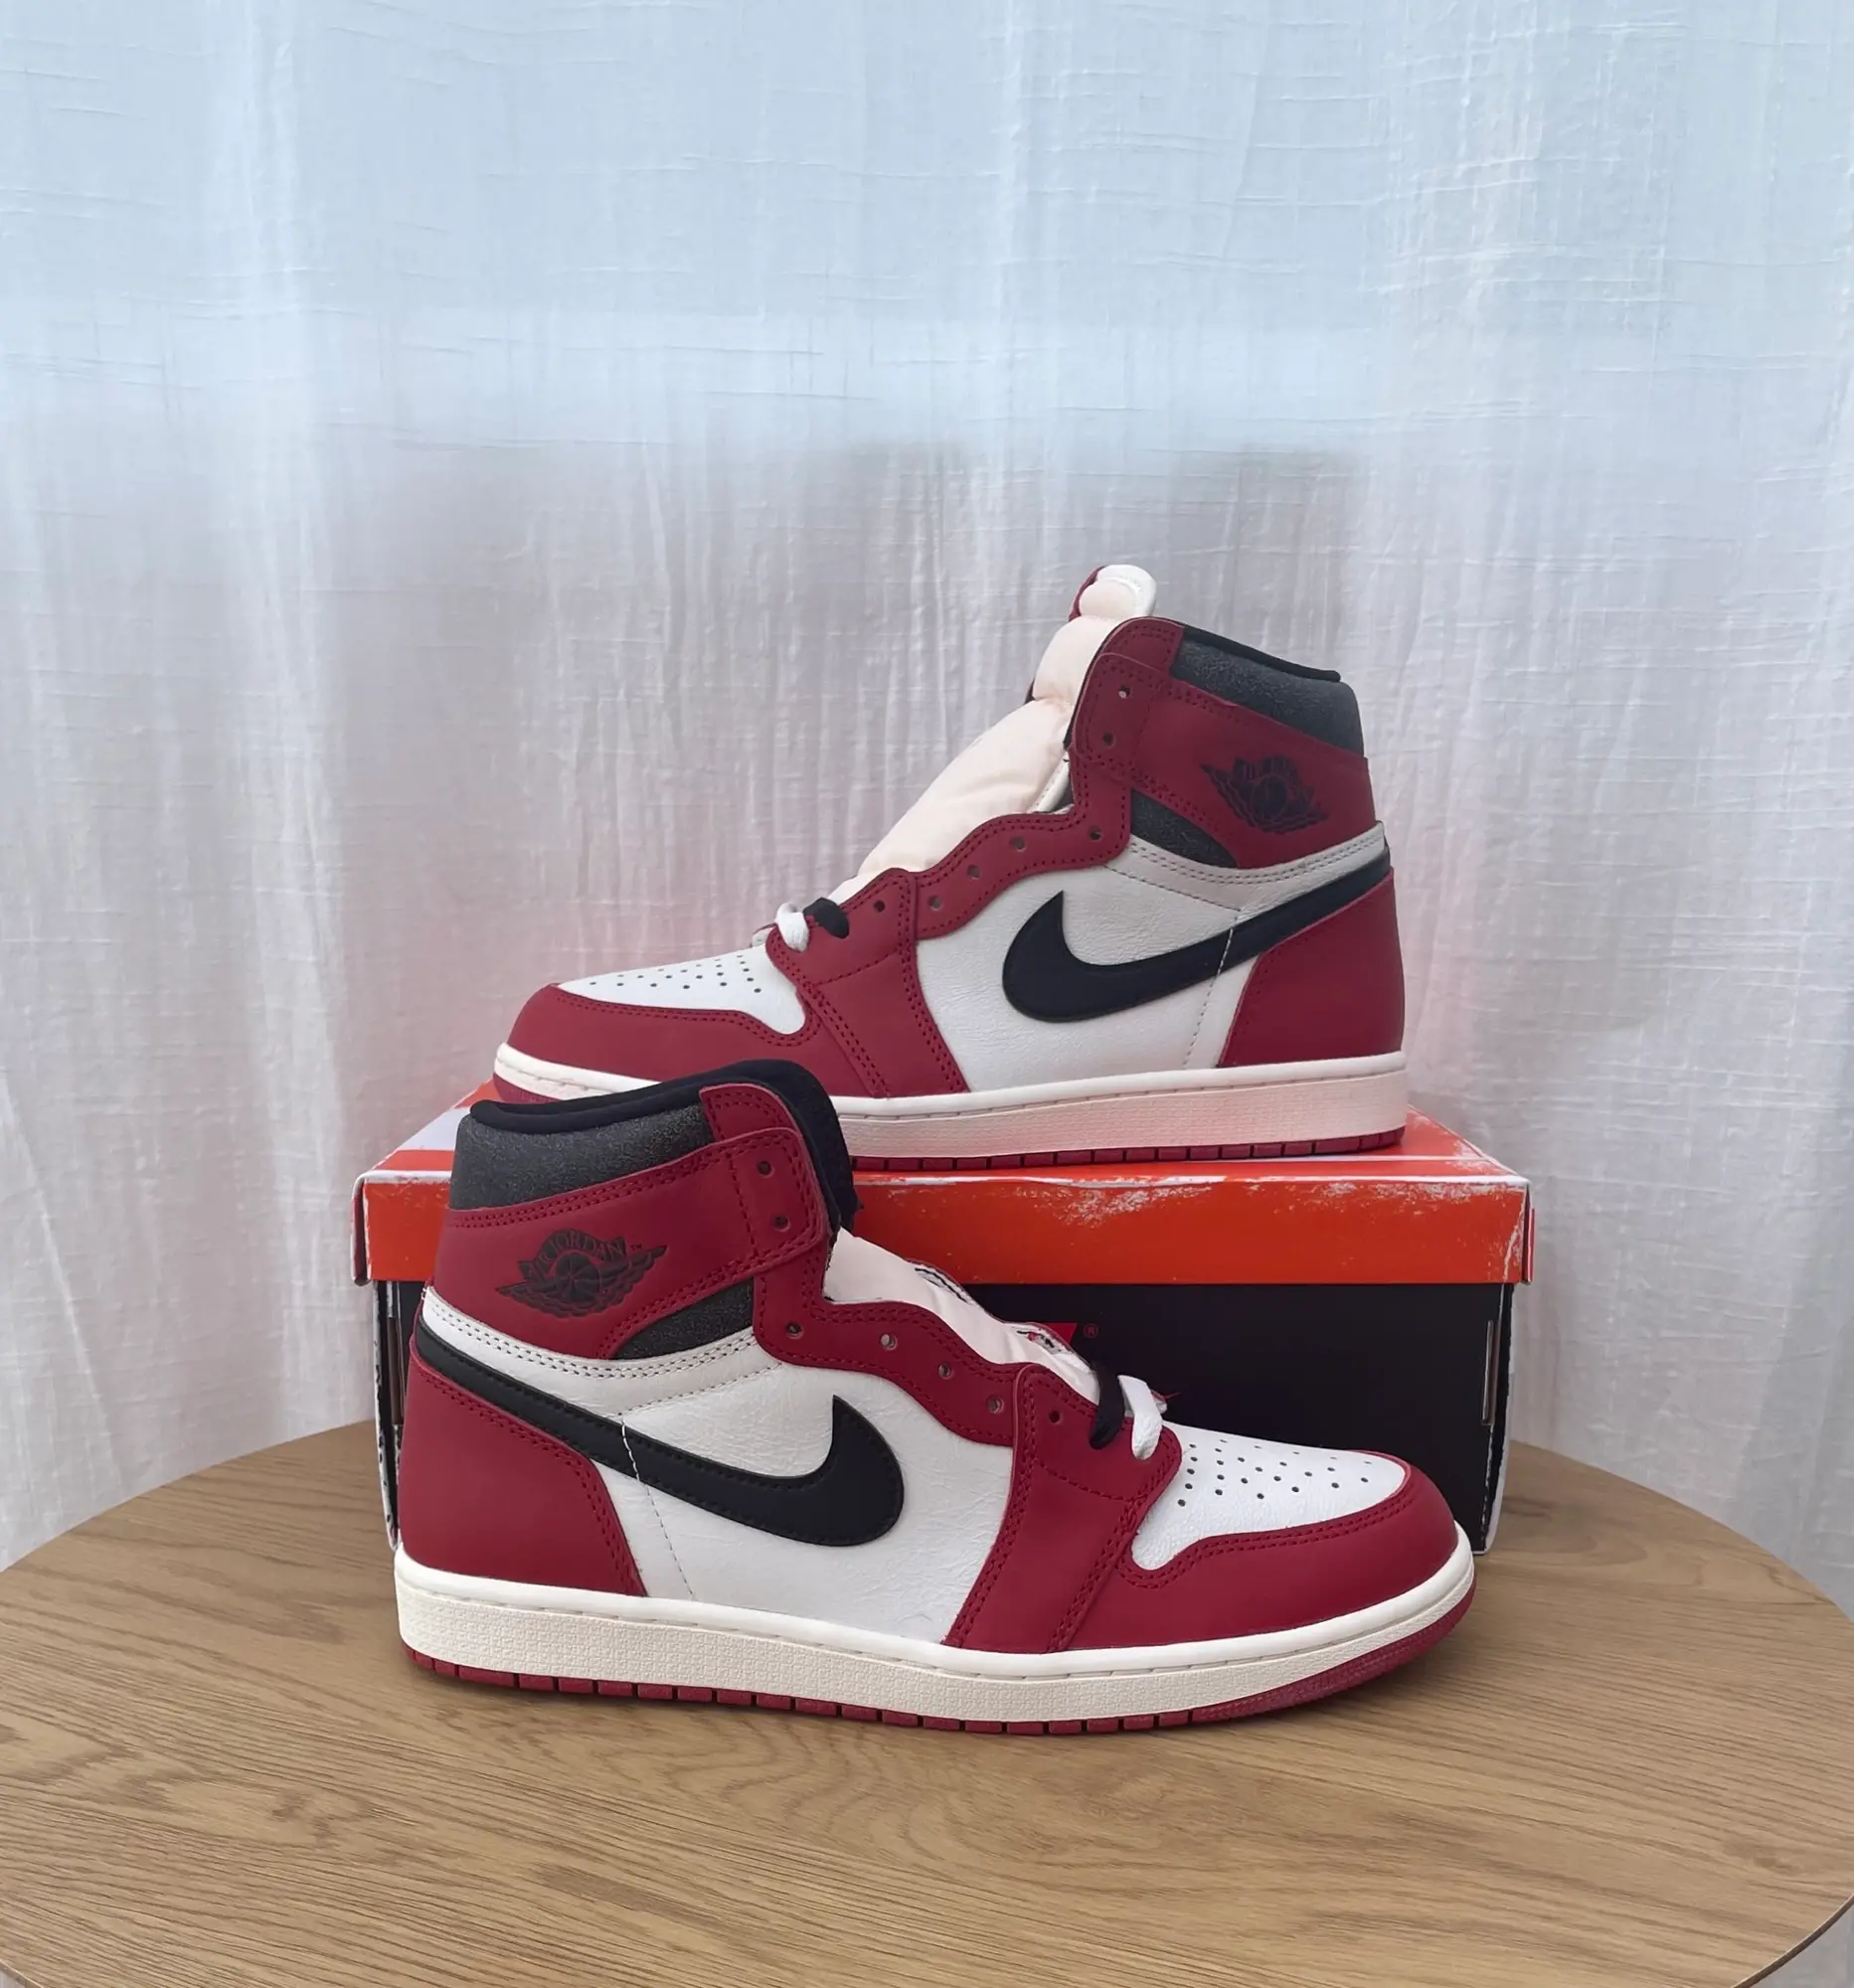 Nike Air Jordan 1 High Chicago Lost and Found